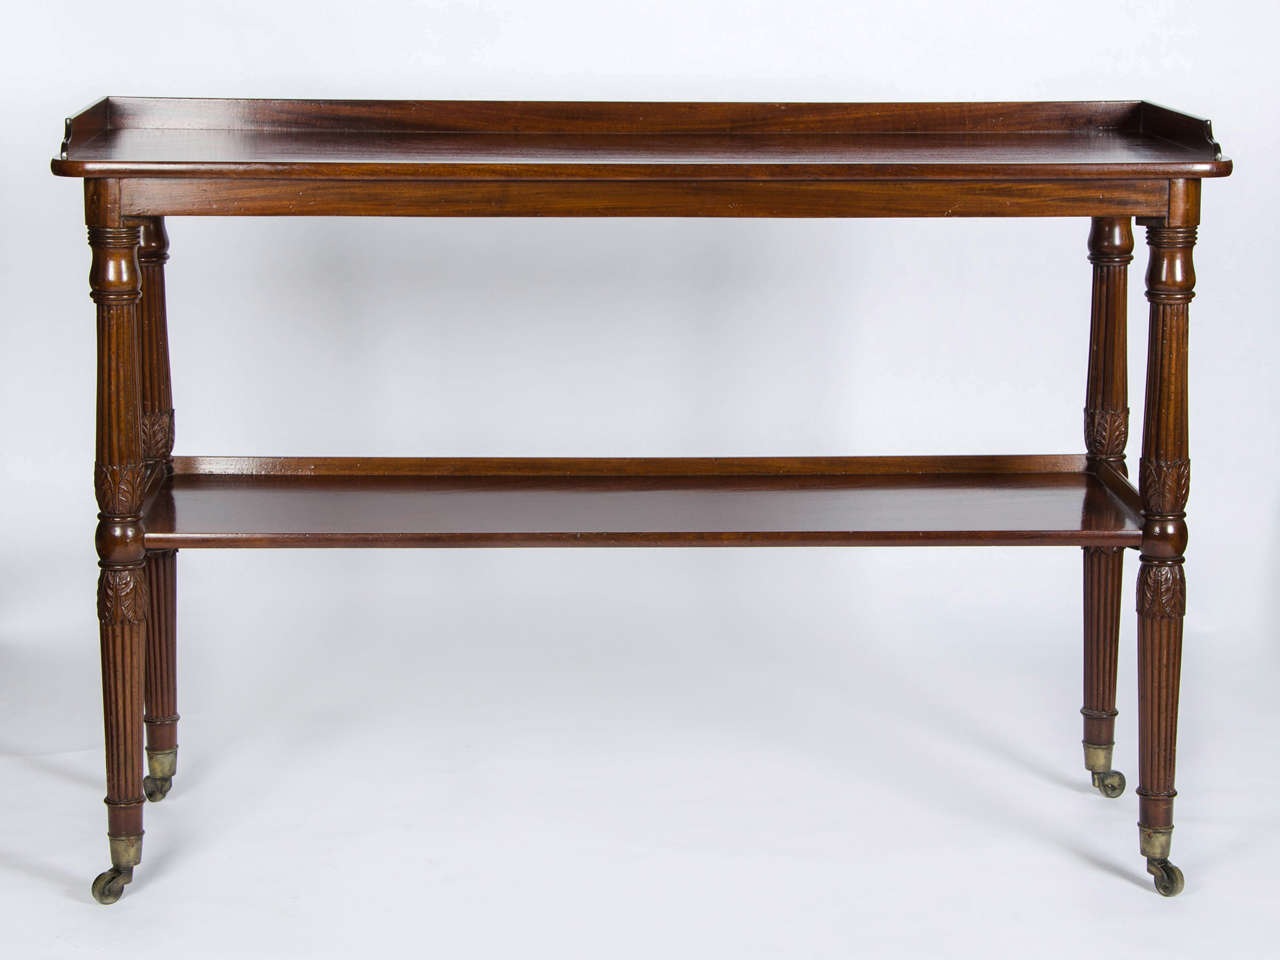 A good and extremely useful Regency period mahogany two tier buffet standing on turned, reeded and carved legs terminating in brass cap castors.